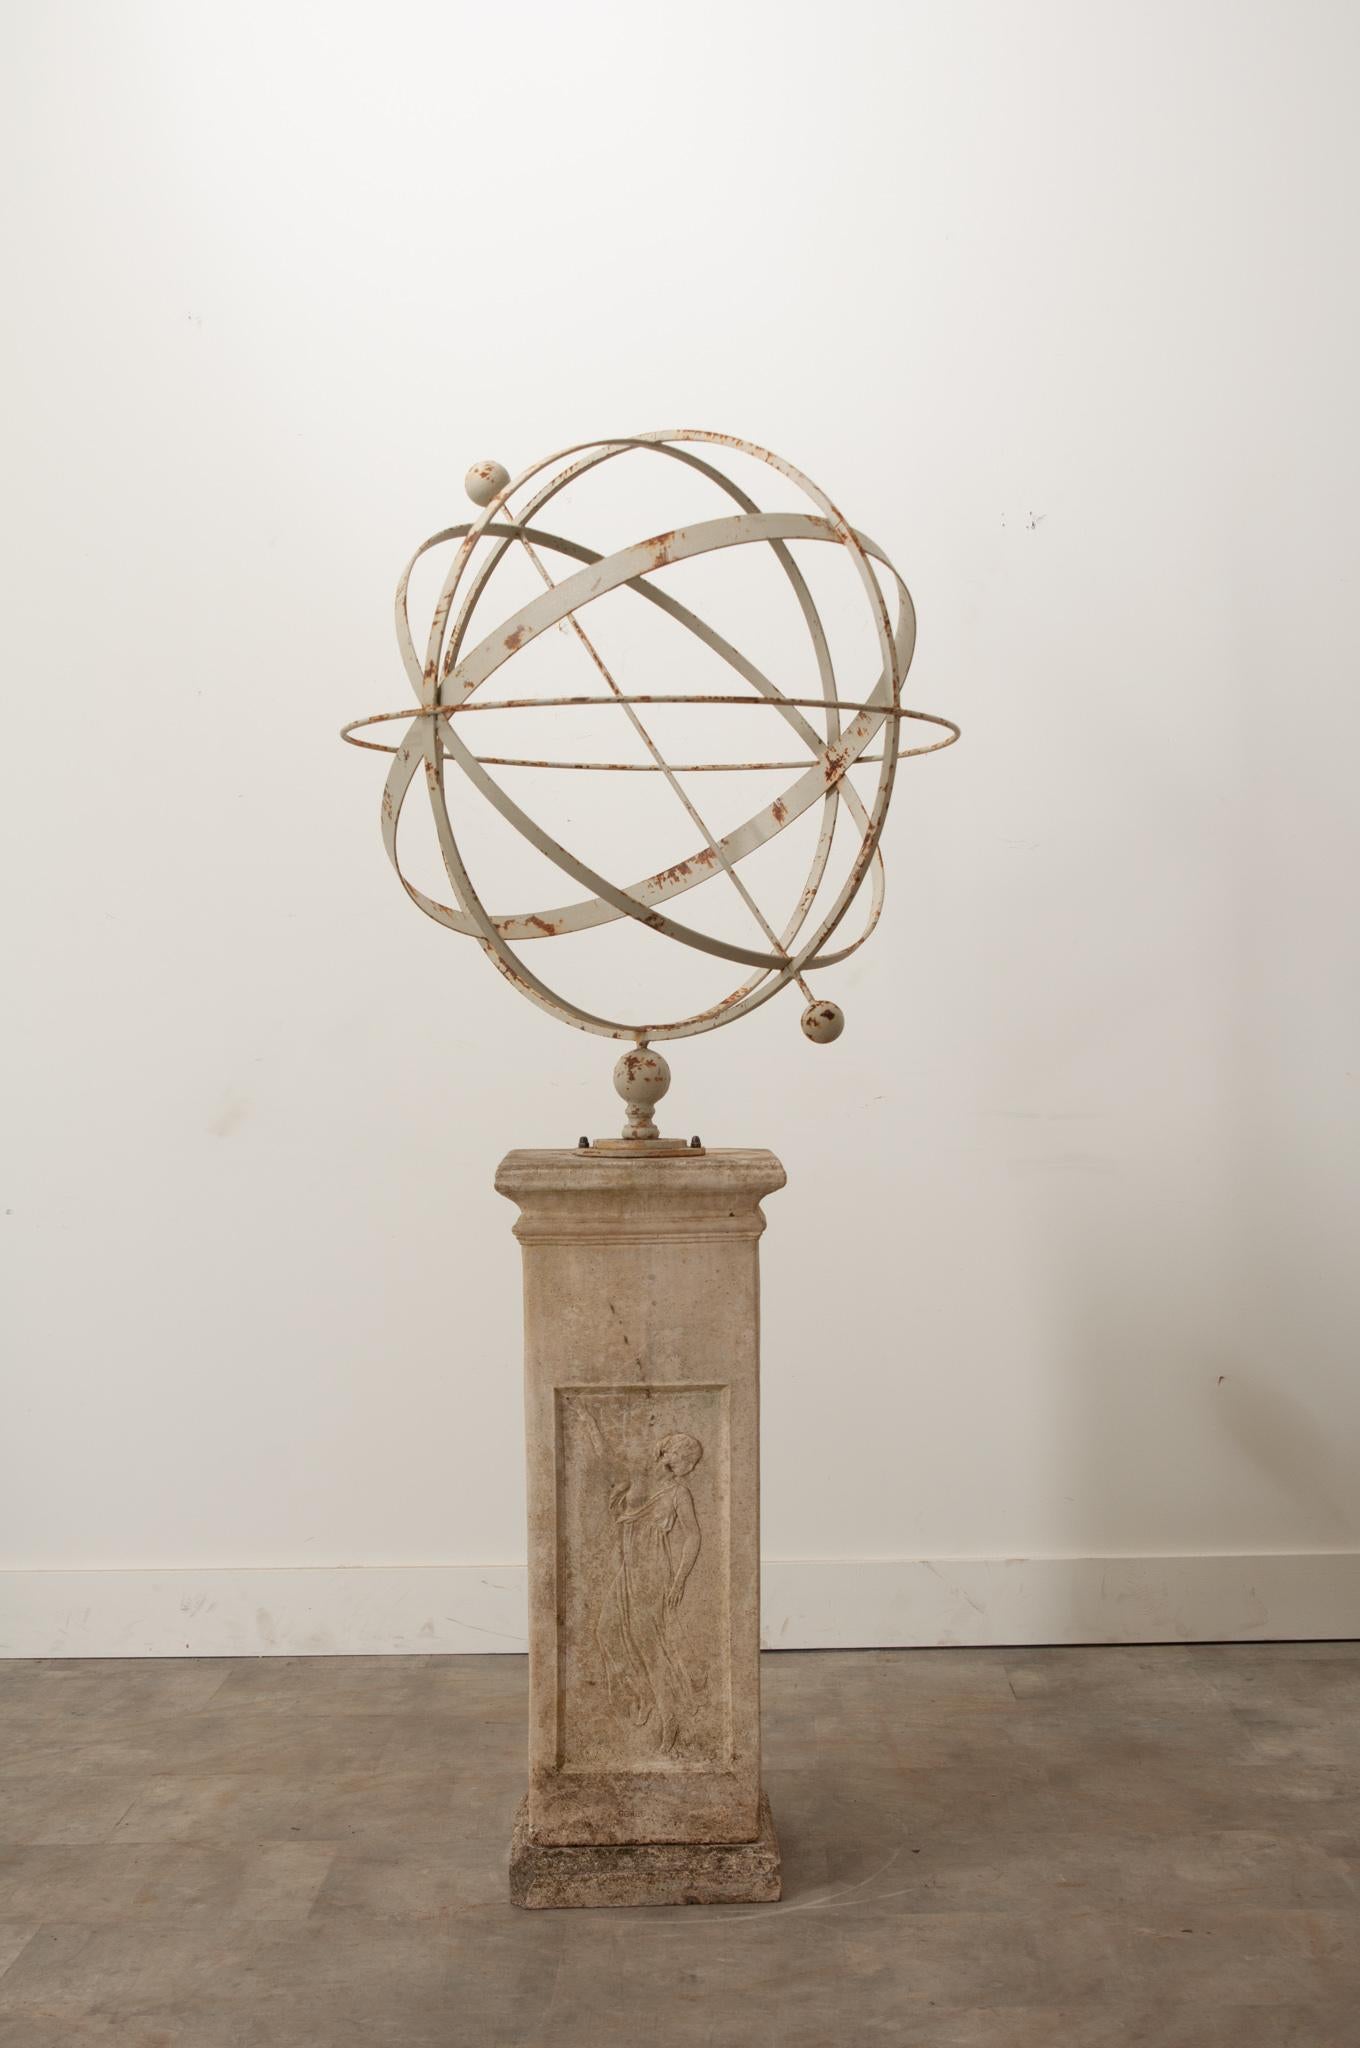 English gardens often have an armillary. These instruments were designed by the ancient Greeks to theoretically track the planets and stars. Adding a touch of whimsy, this maintenance free garden element will enhance any outdoor space. Each side of